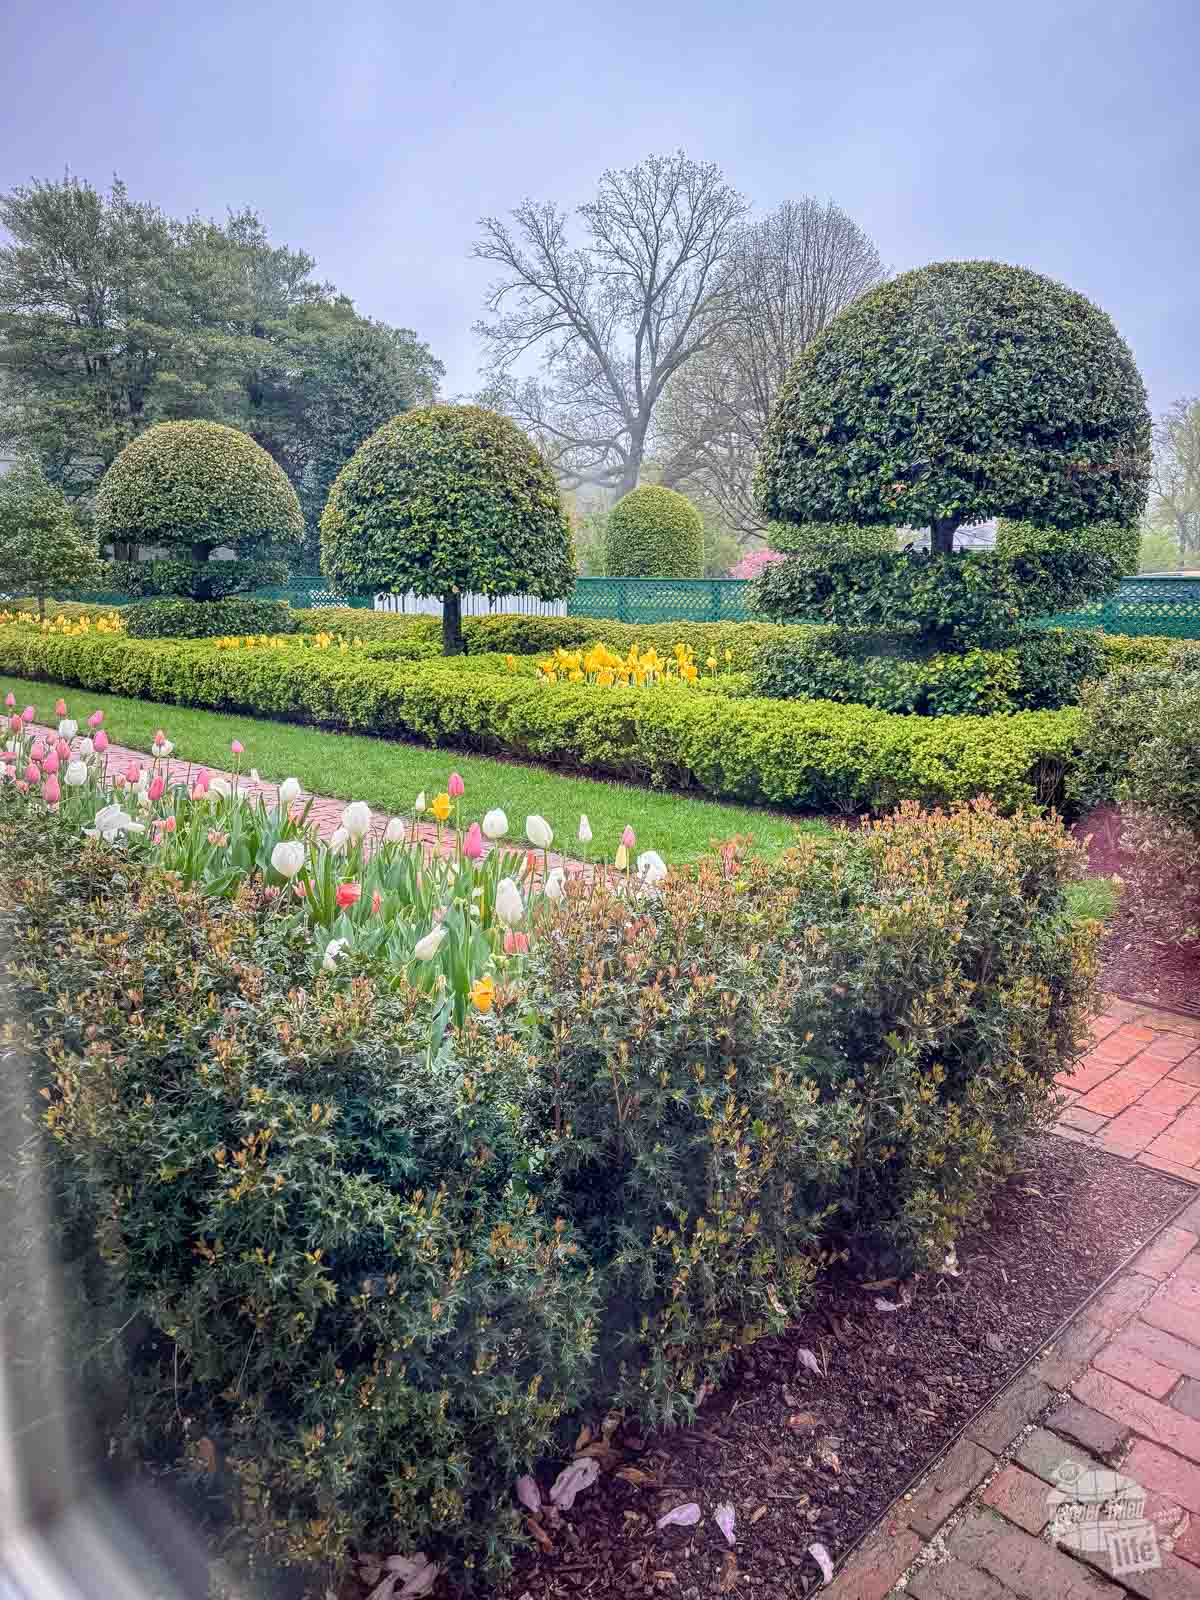 A manicured garden with several scuplted trees and bushes, along with a plethora of flowers.